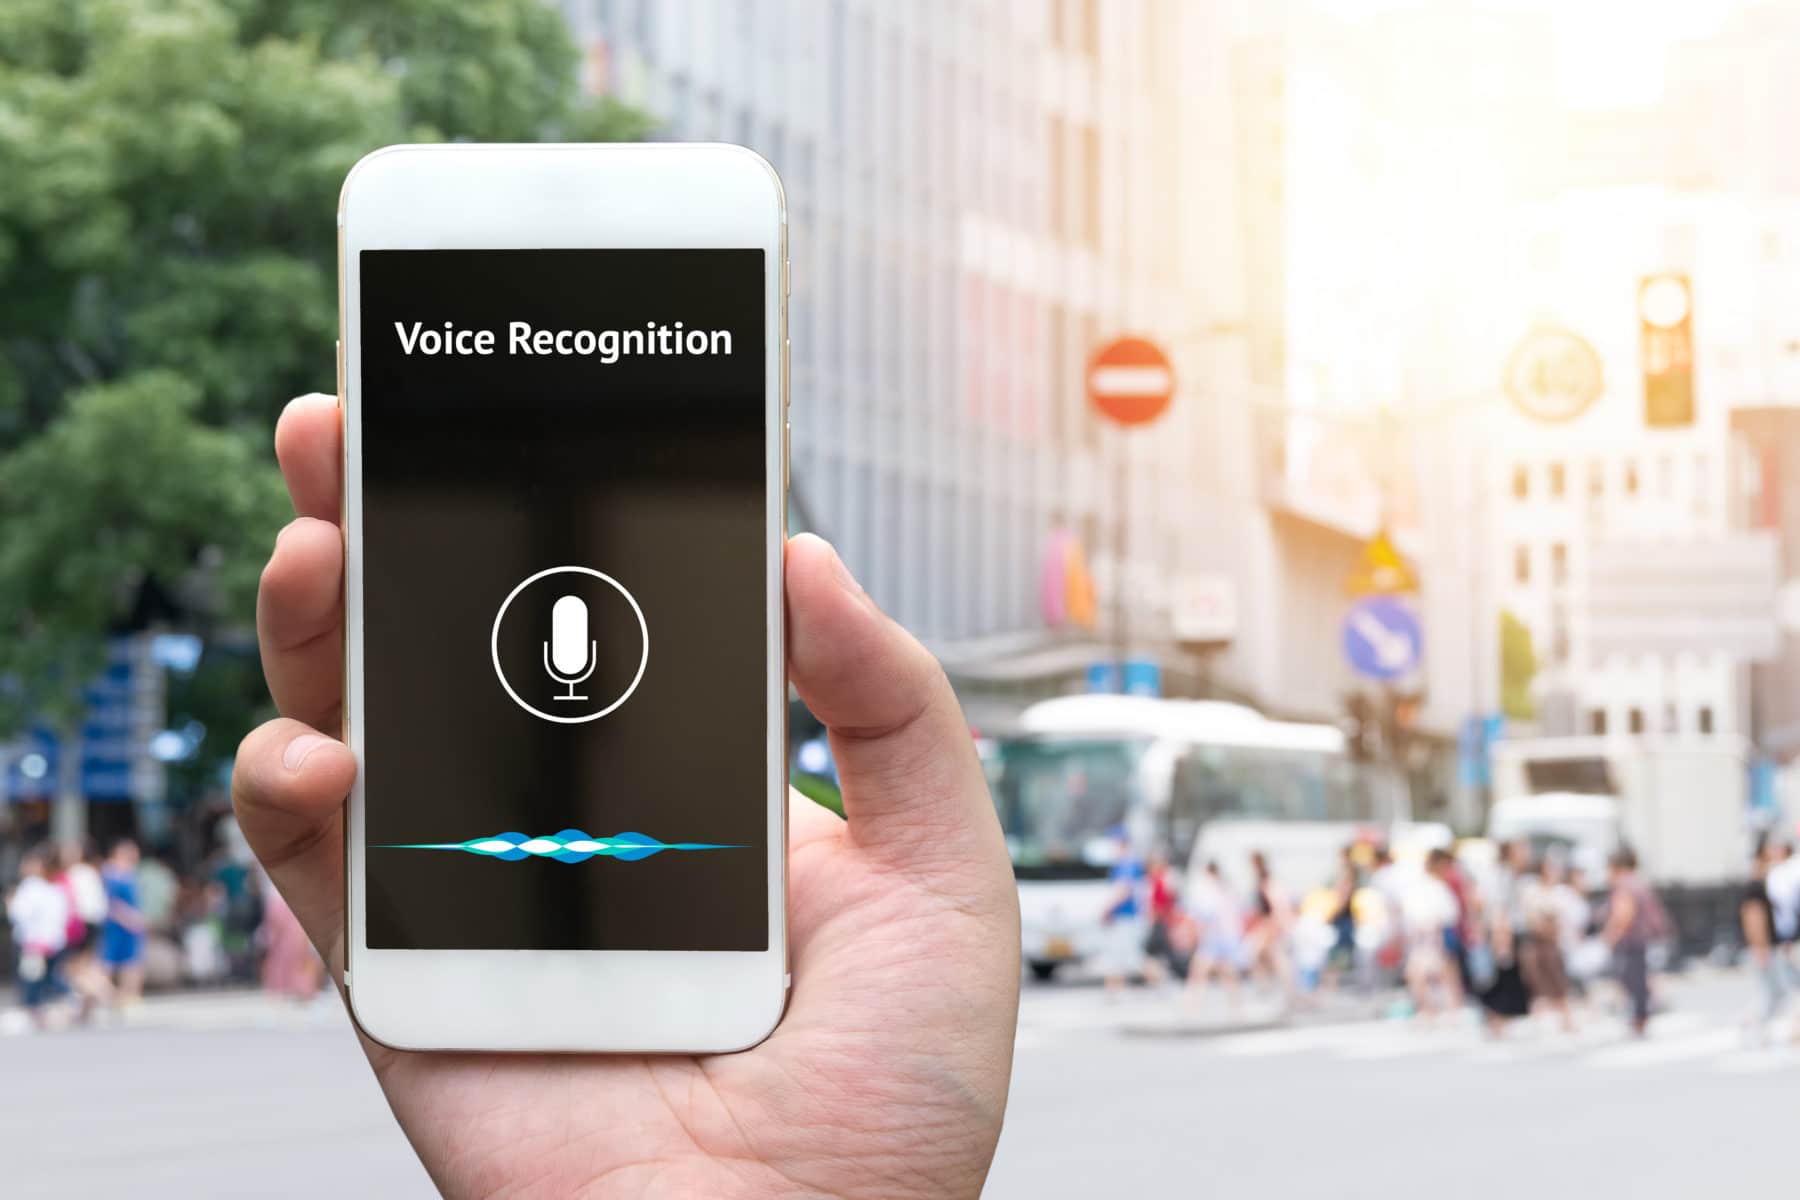 What Are The Advantages Of Voice Recognition?